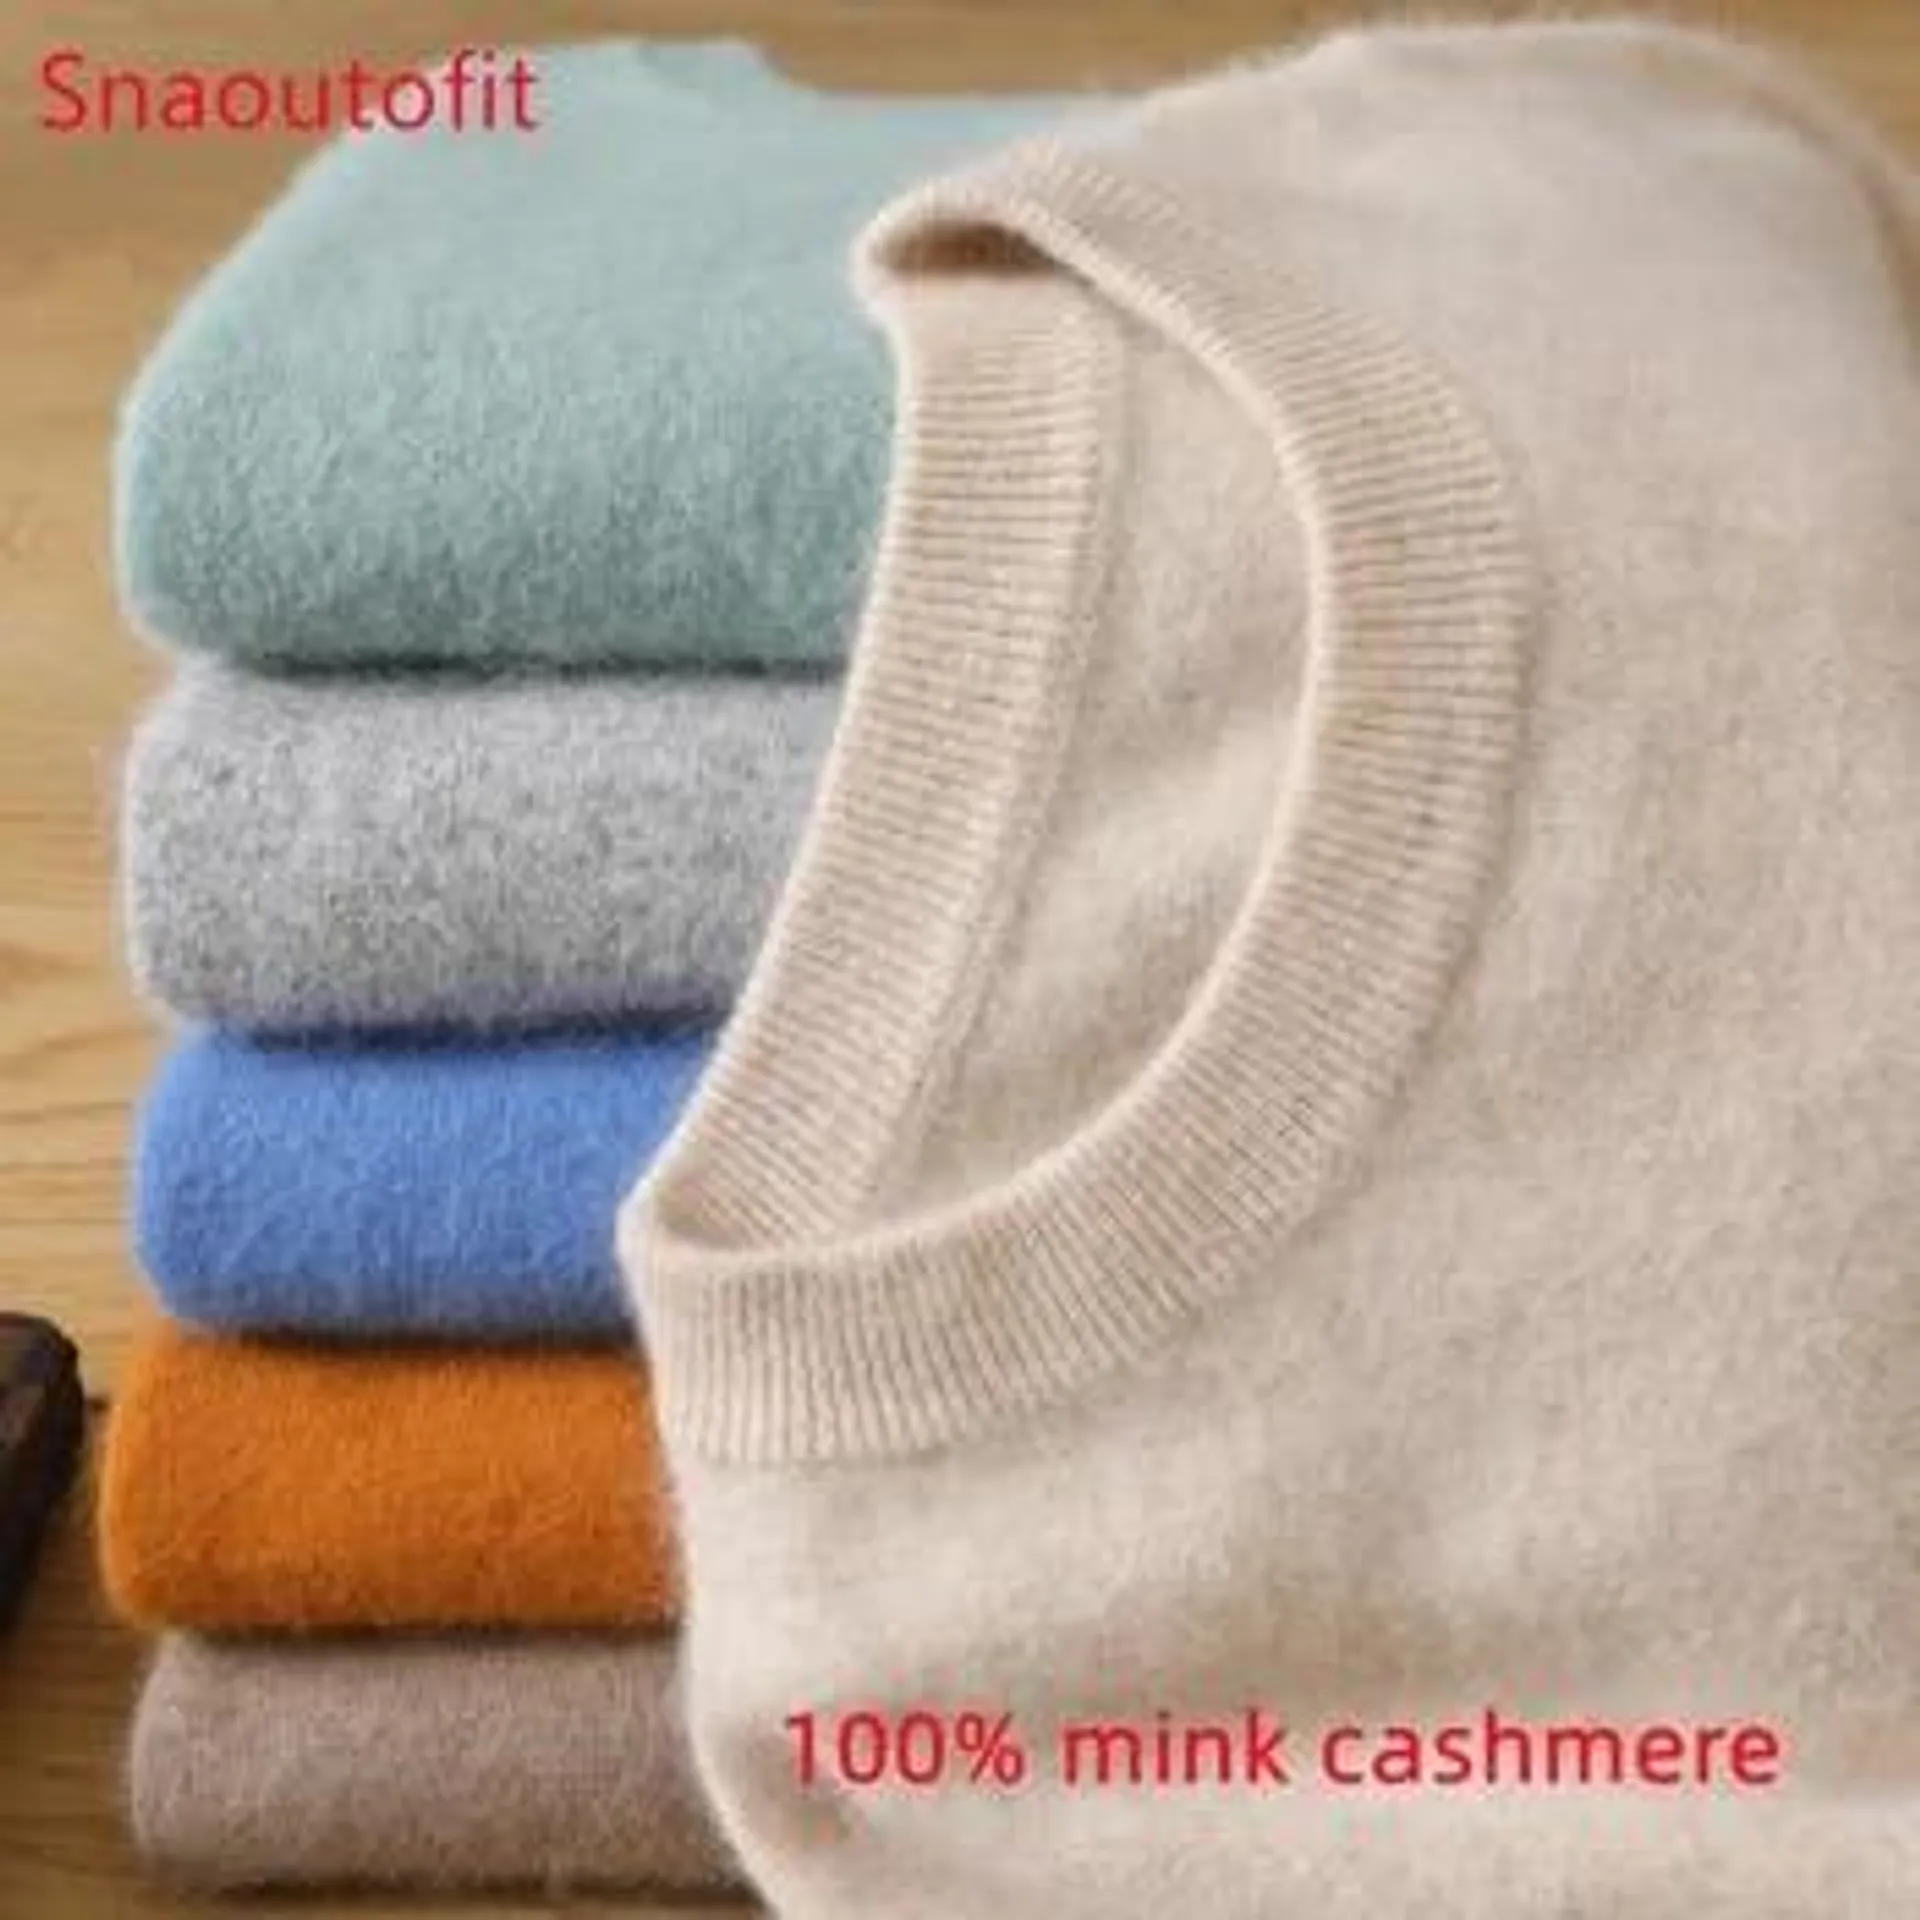 Men's 100% Pure Mink Cashmere Sweater O-Neck Pullovers Knit Sweater Autumn and Winter New Long Sleeve High-End Jumpers Mink Tops